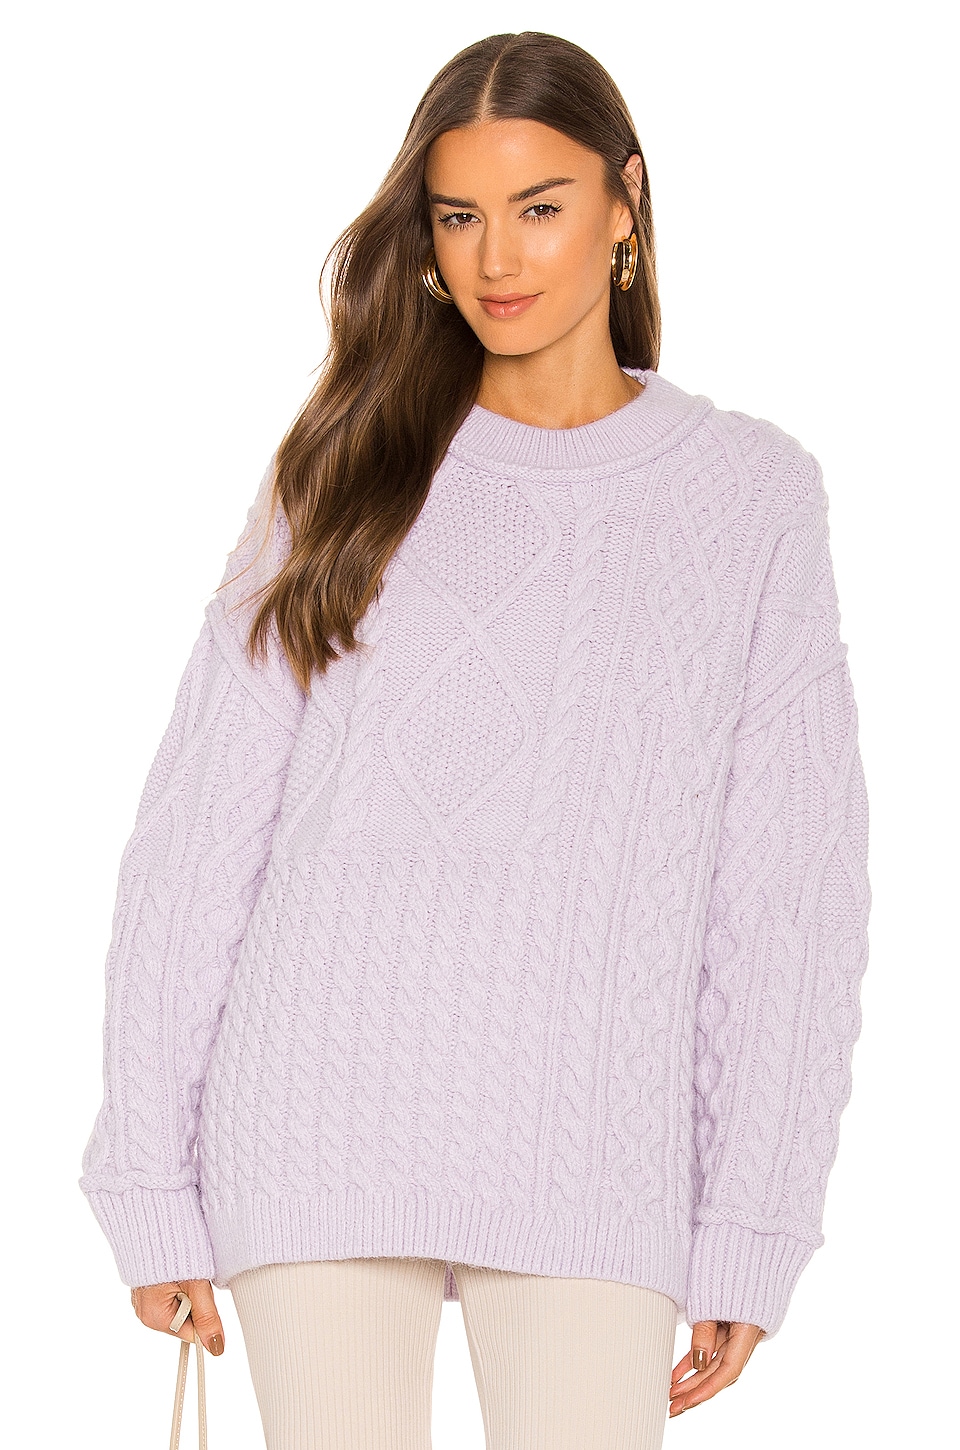 Free People Leslie Cable Tunic in Frost Lavender | REVOLVE